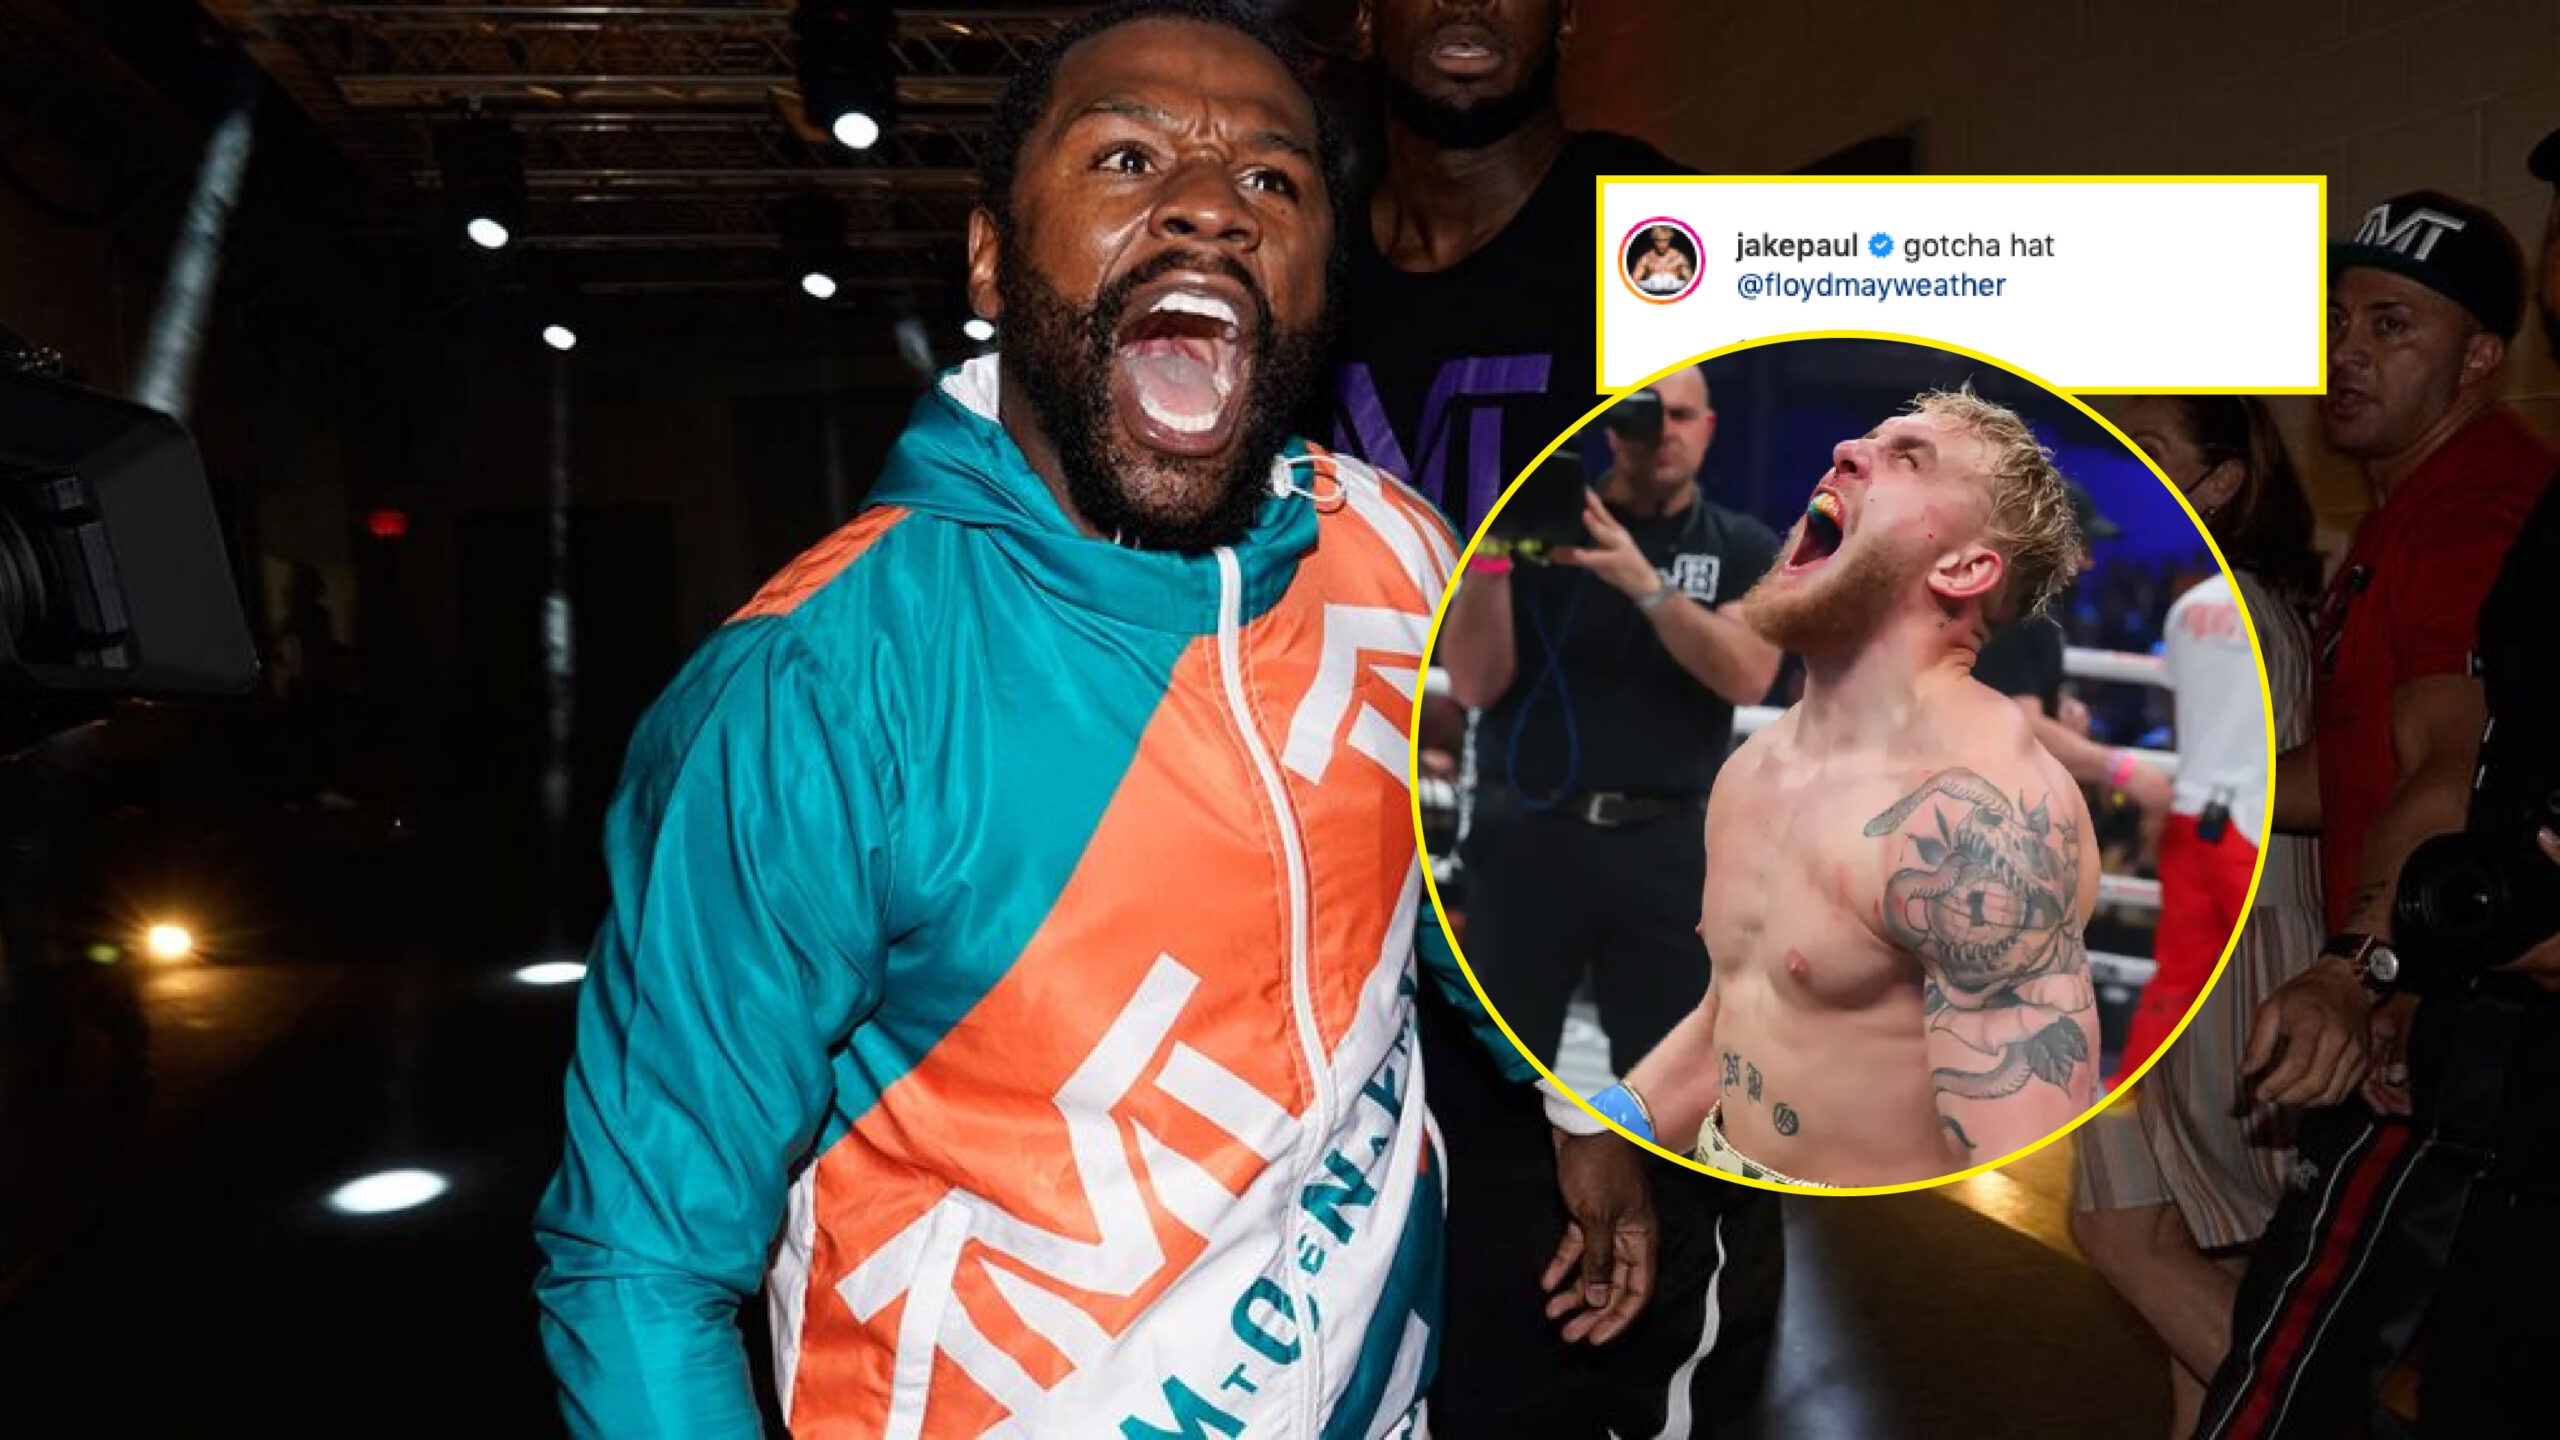 Floyd Mayweather calls out Jake Paul after scuffle during press conference